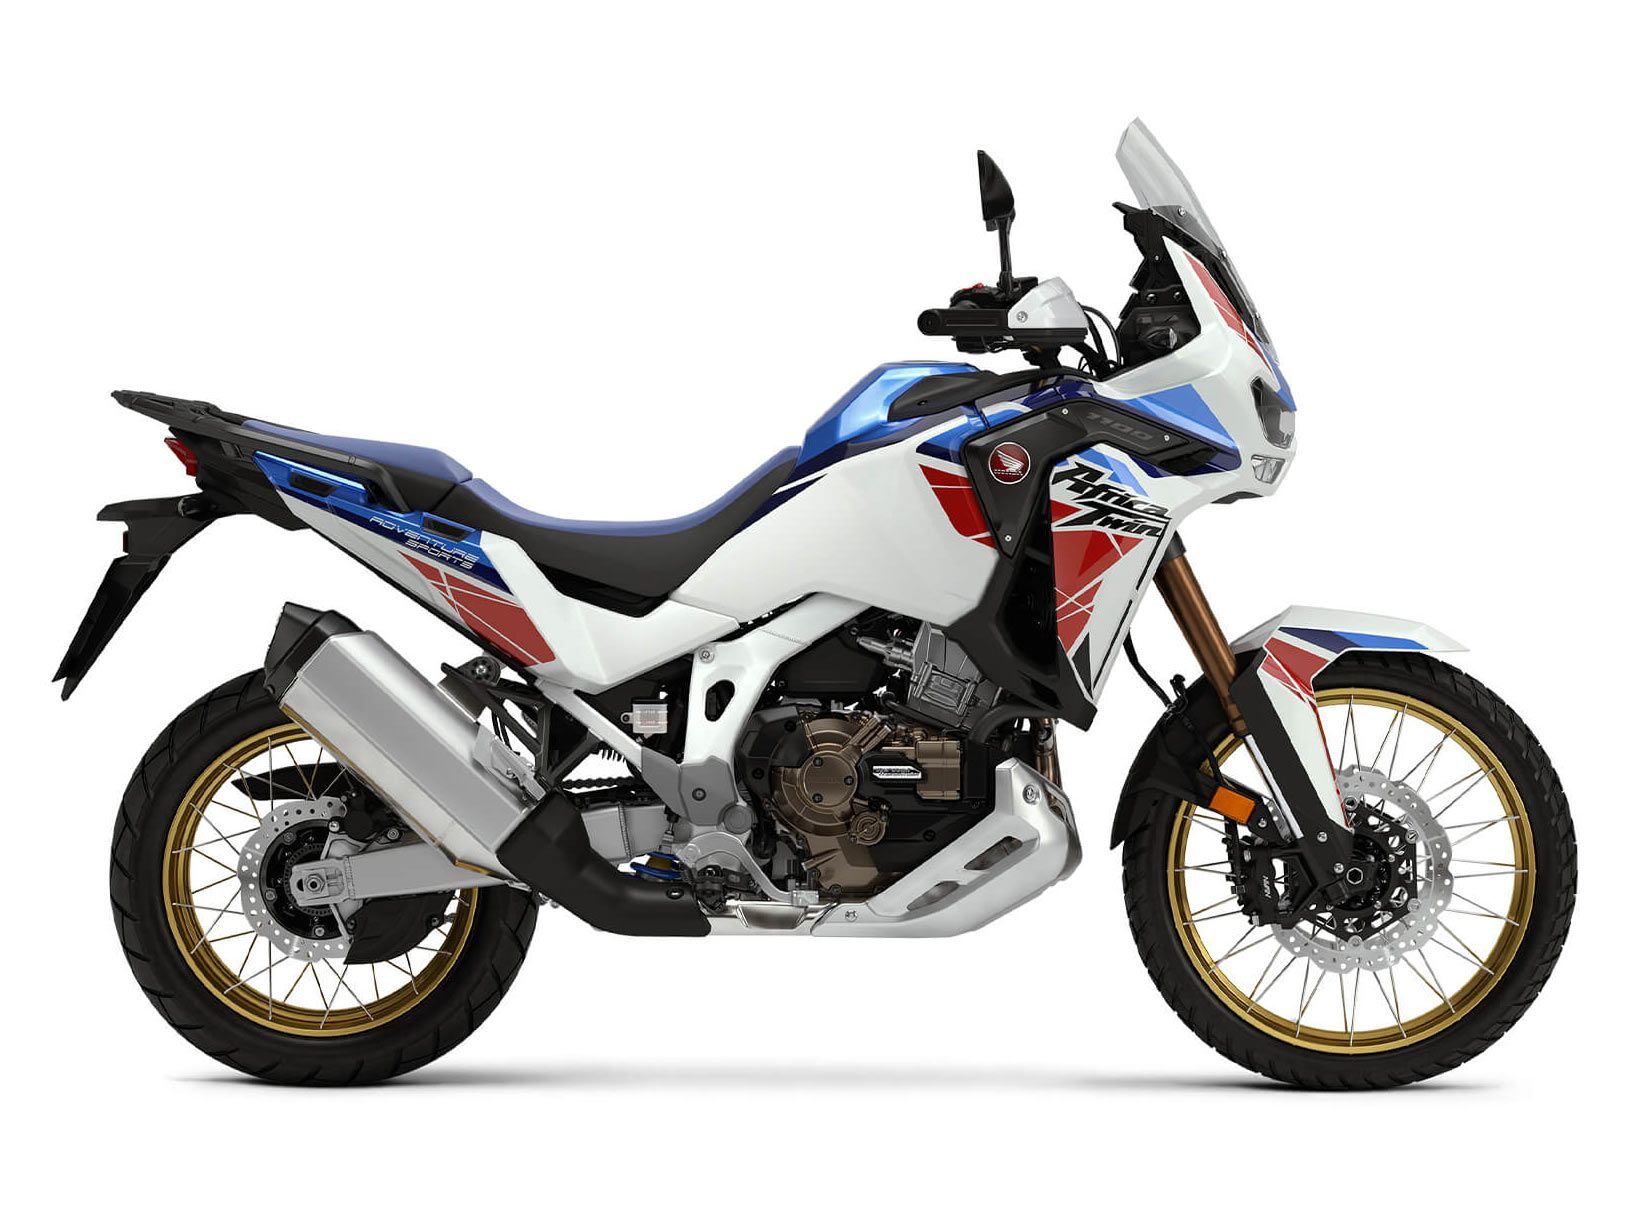 The Africa Twin’s DCT gets high marks in the dirt.